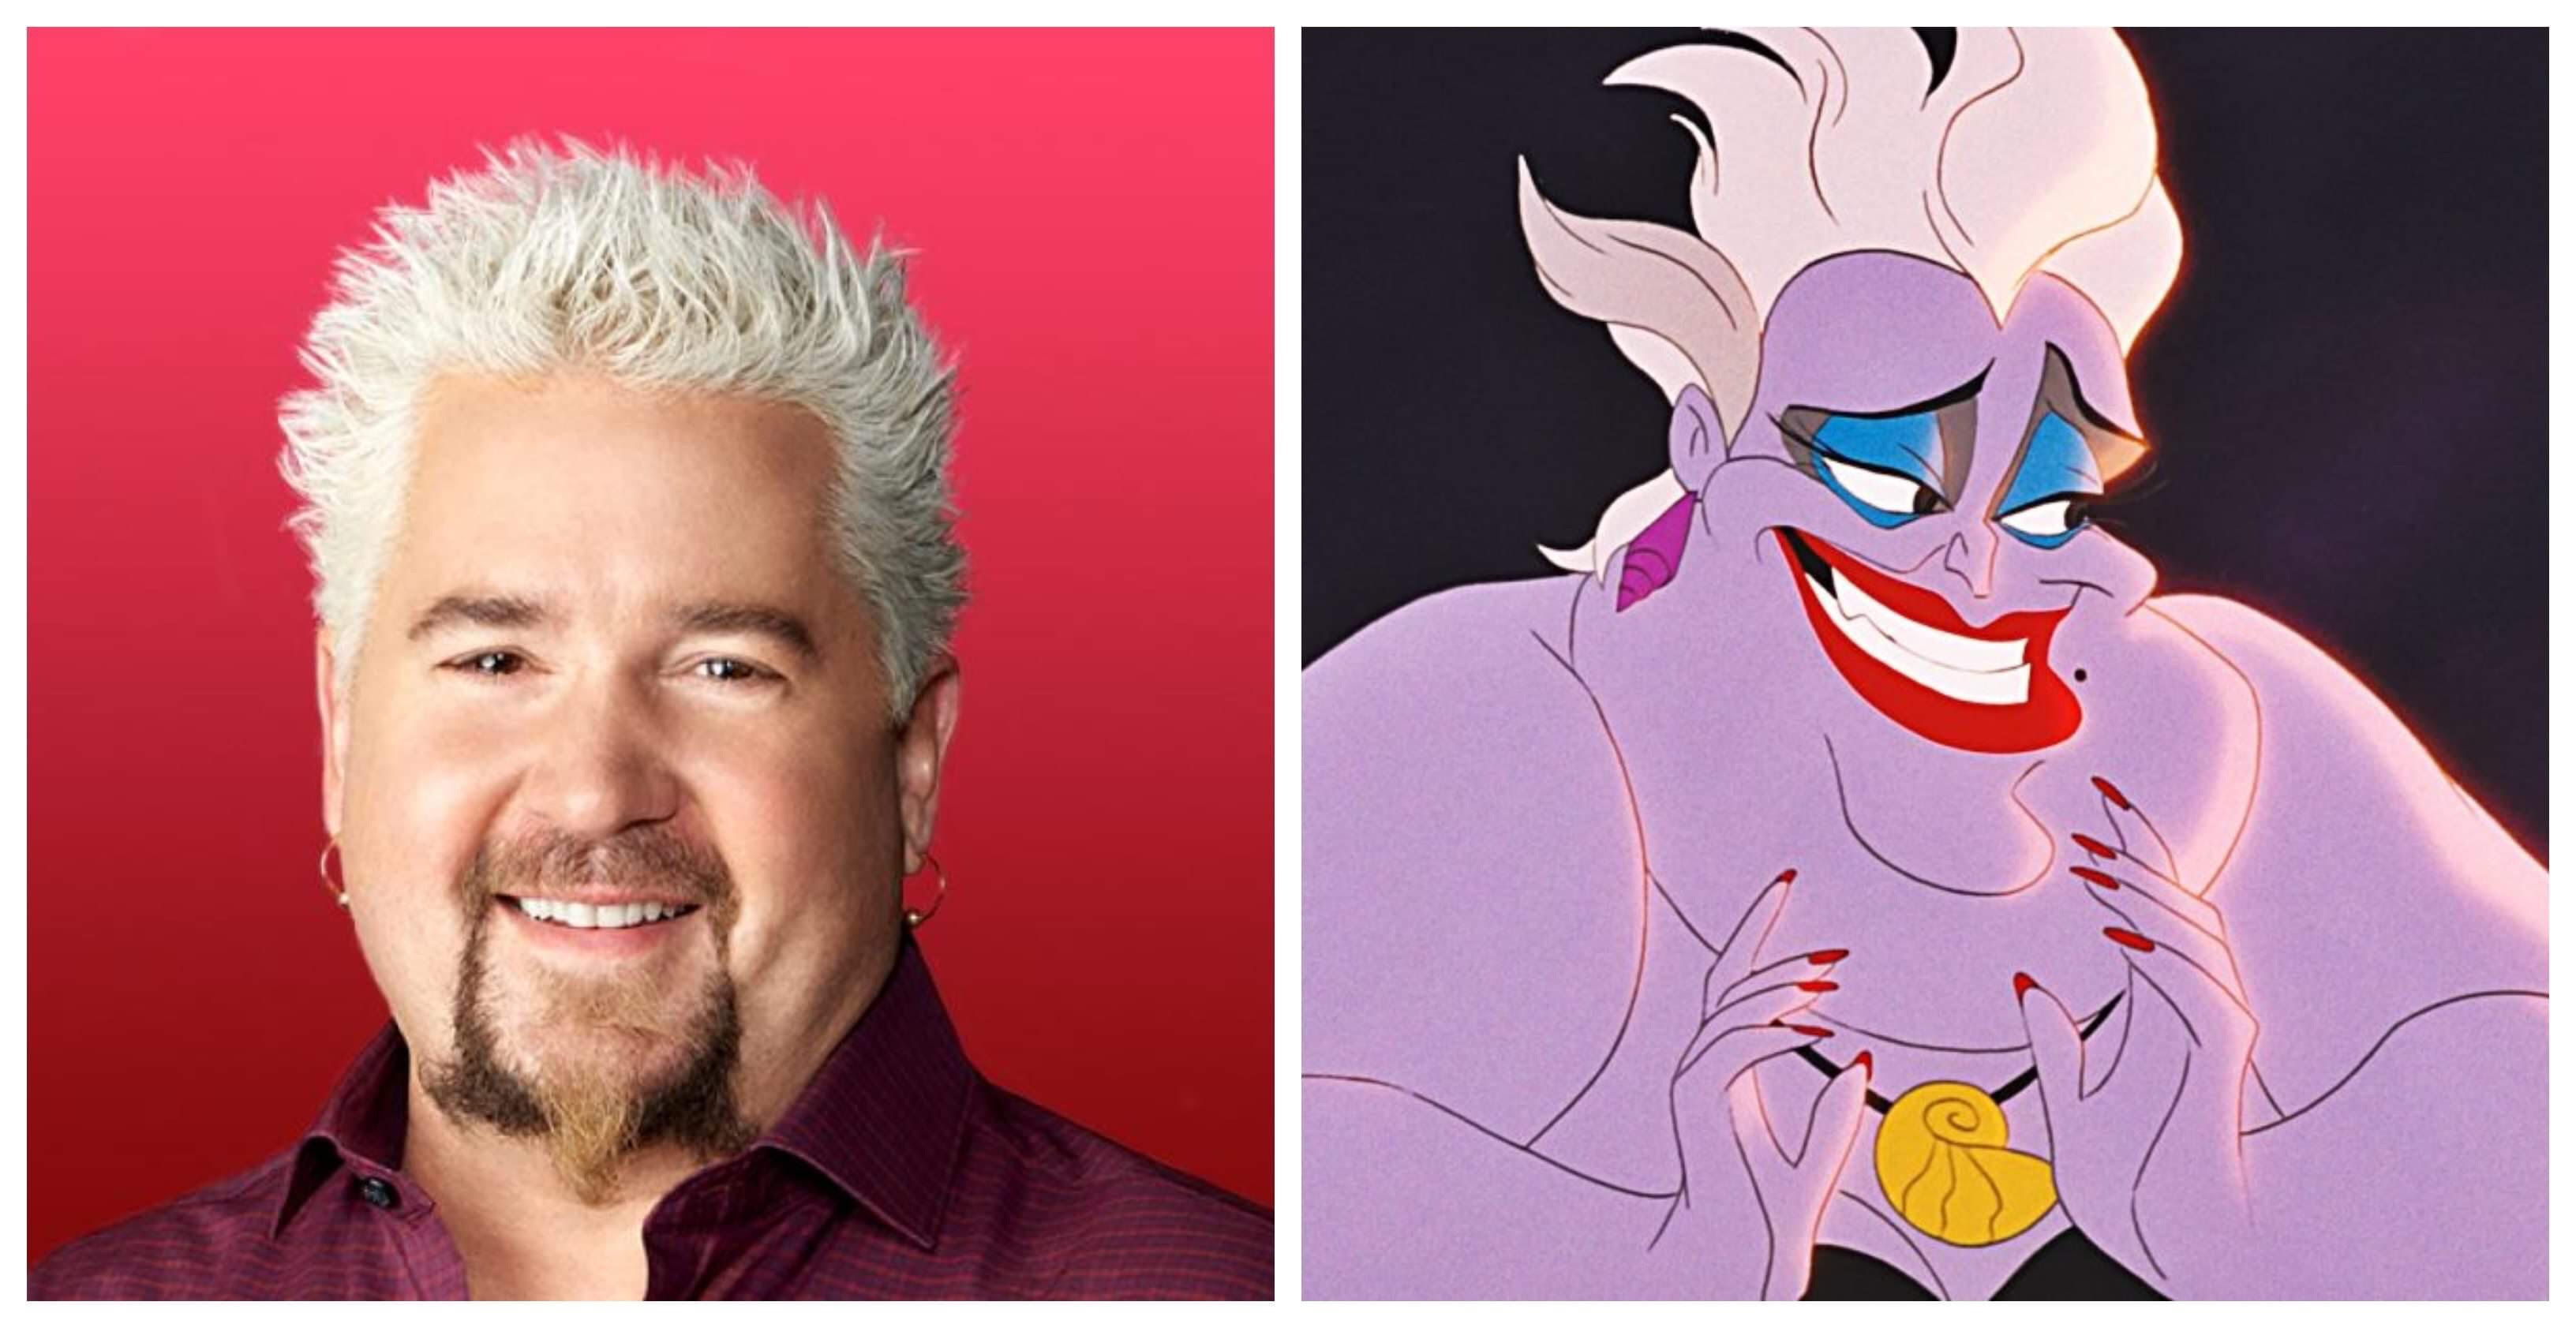 Fans Want Guy Fieri to Play Ursula in “The Little Mermaid”